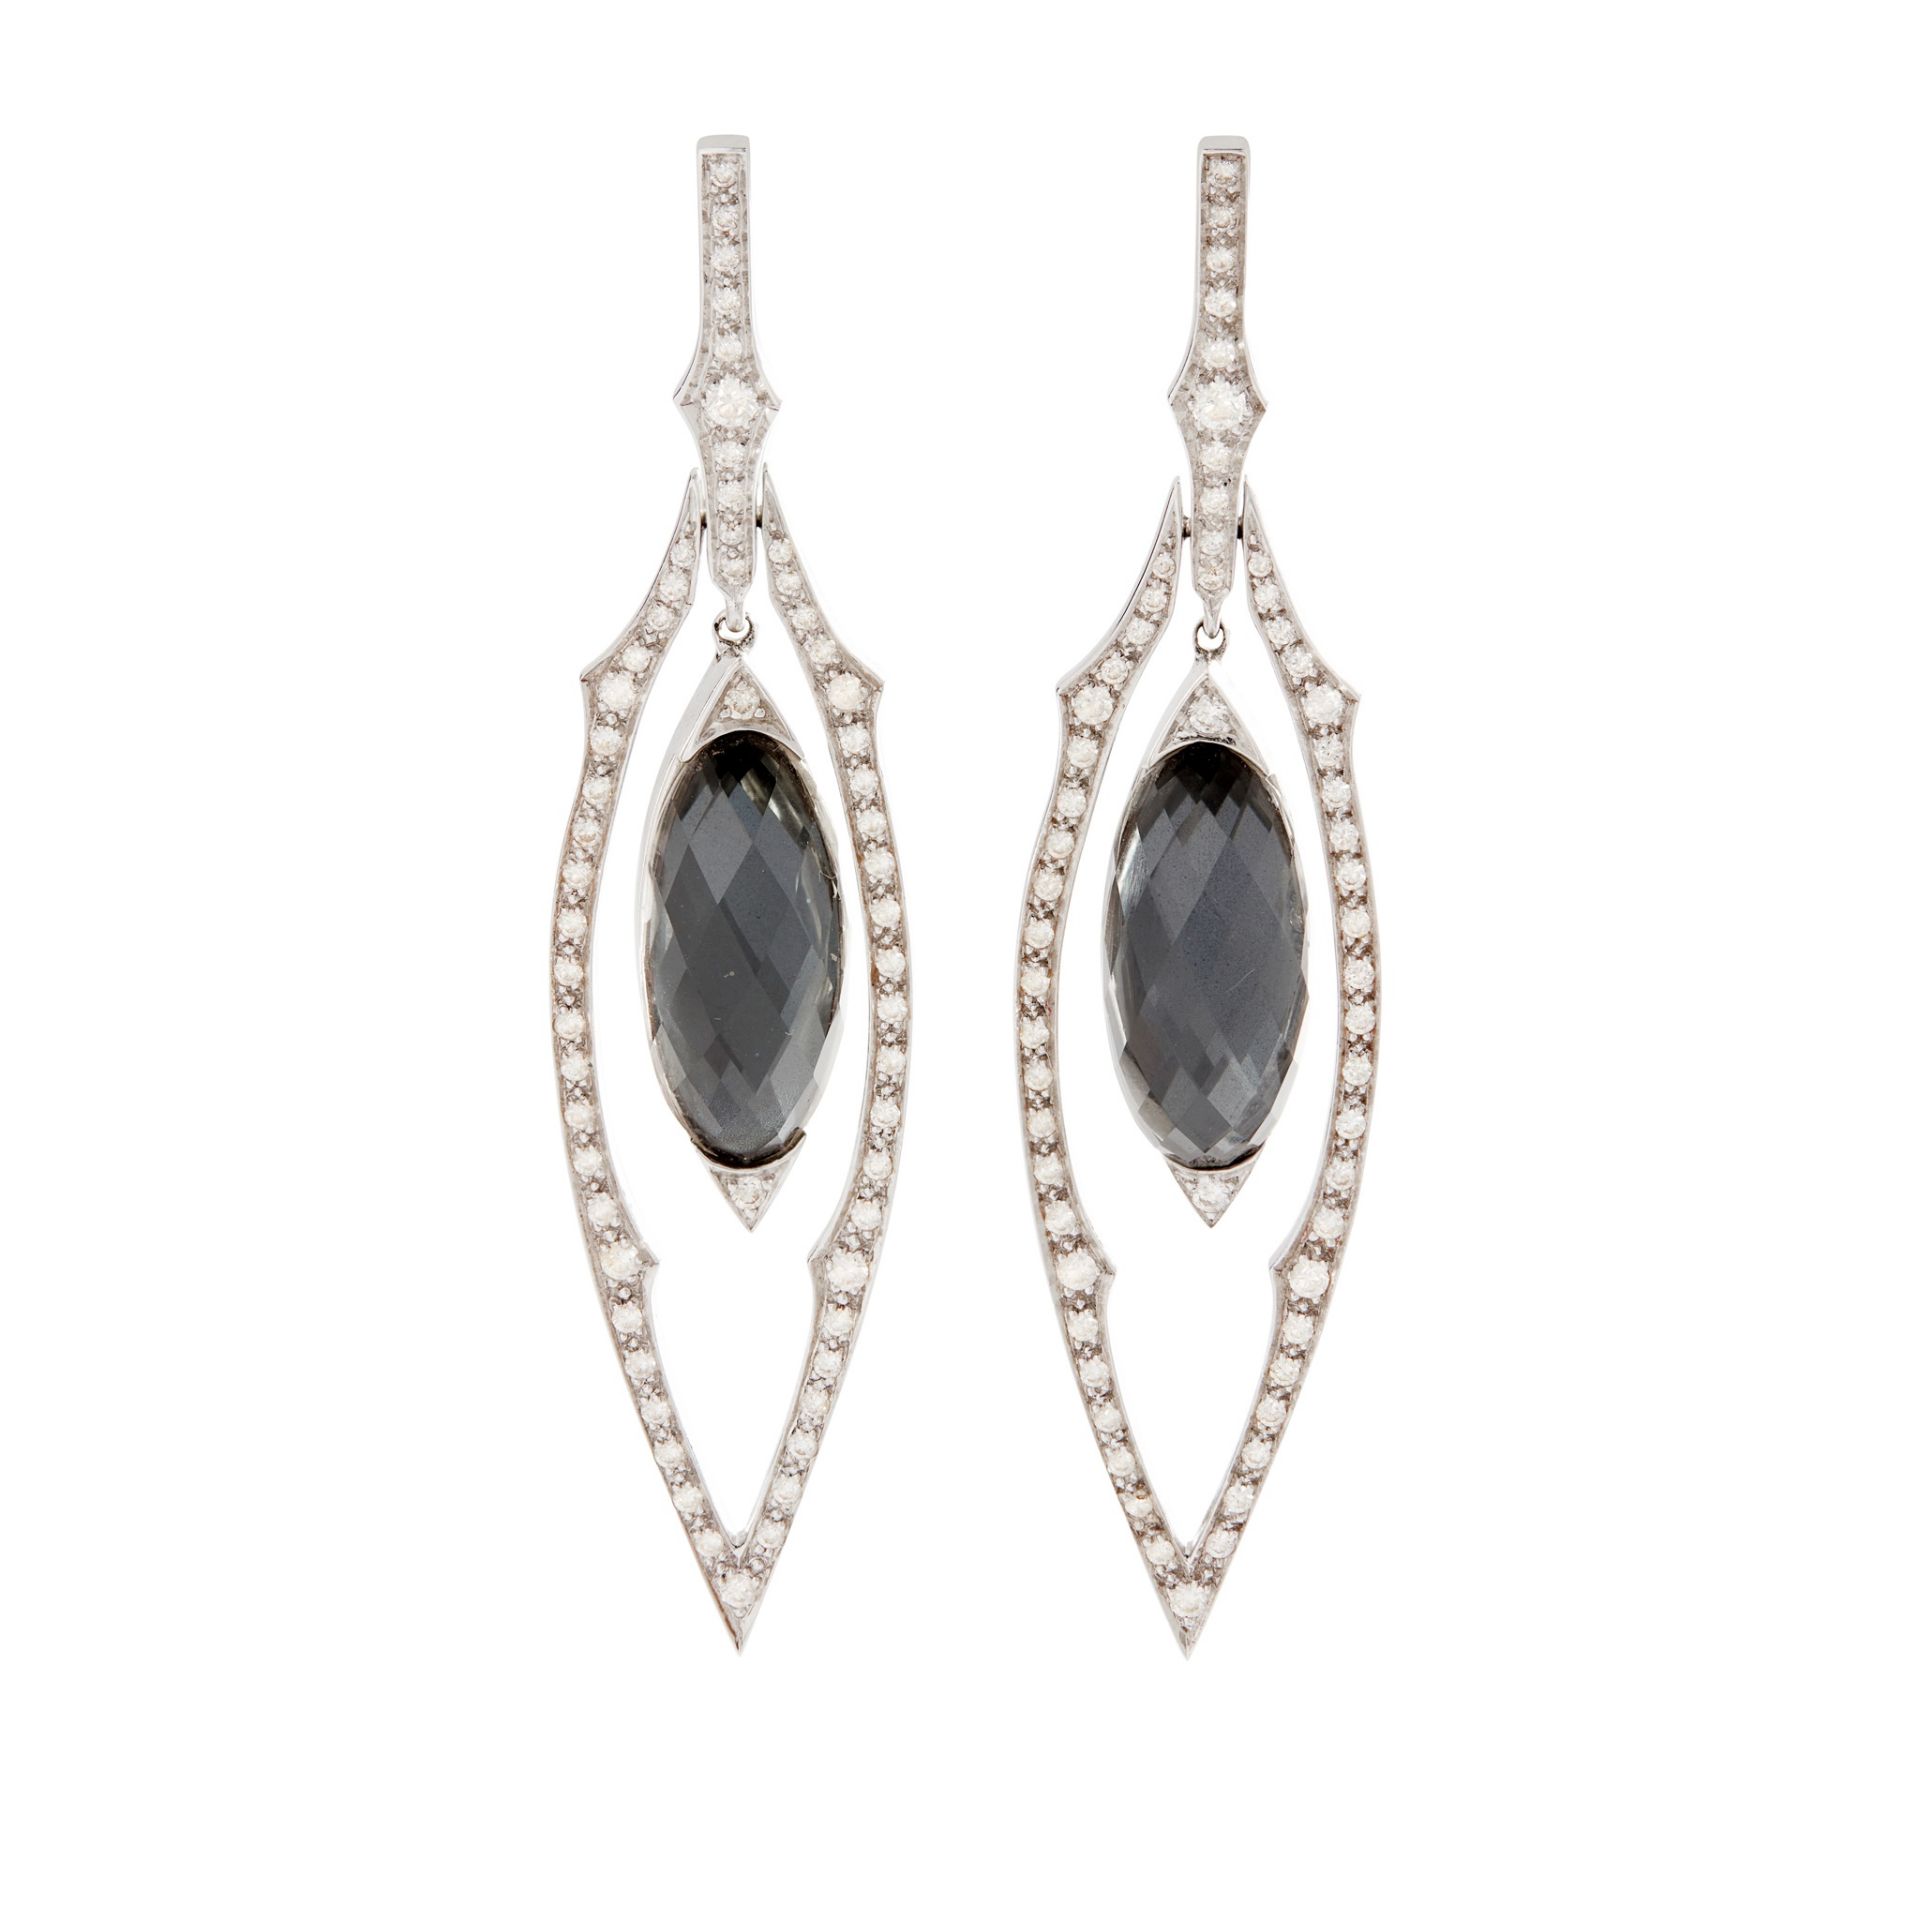 A pair of 'Crystal Haze' pendent earrings, by Stephen Webster